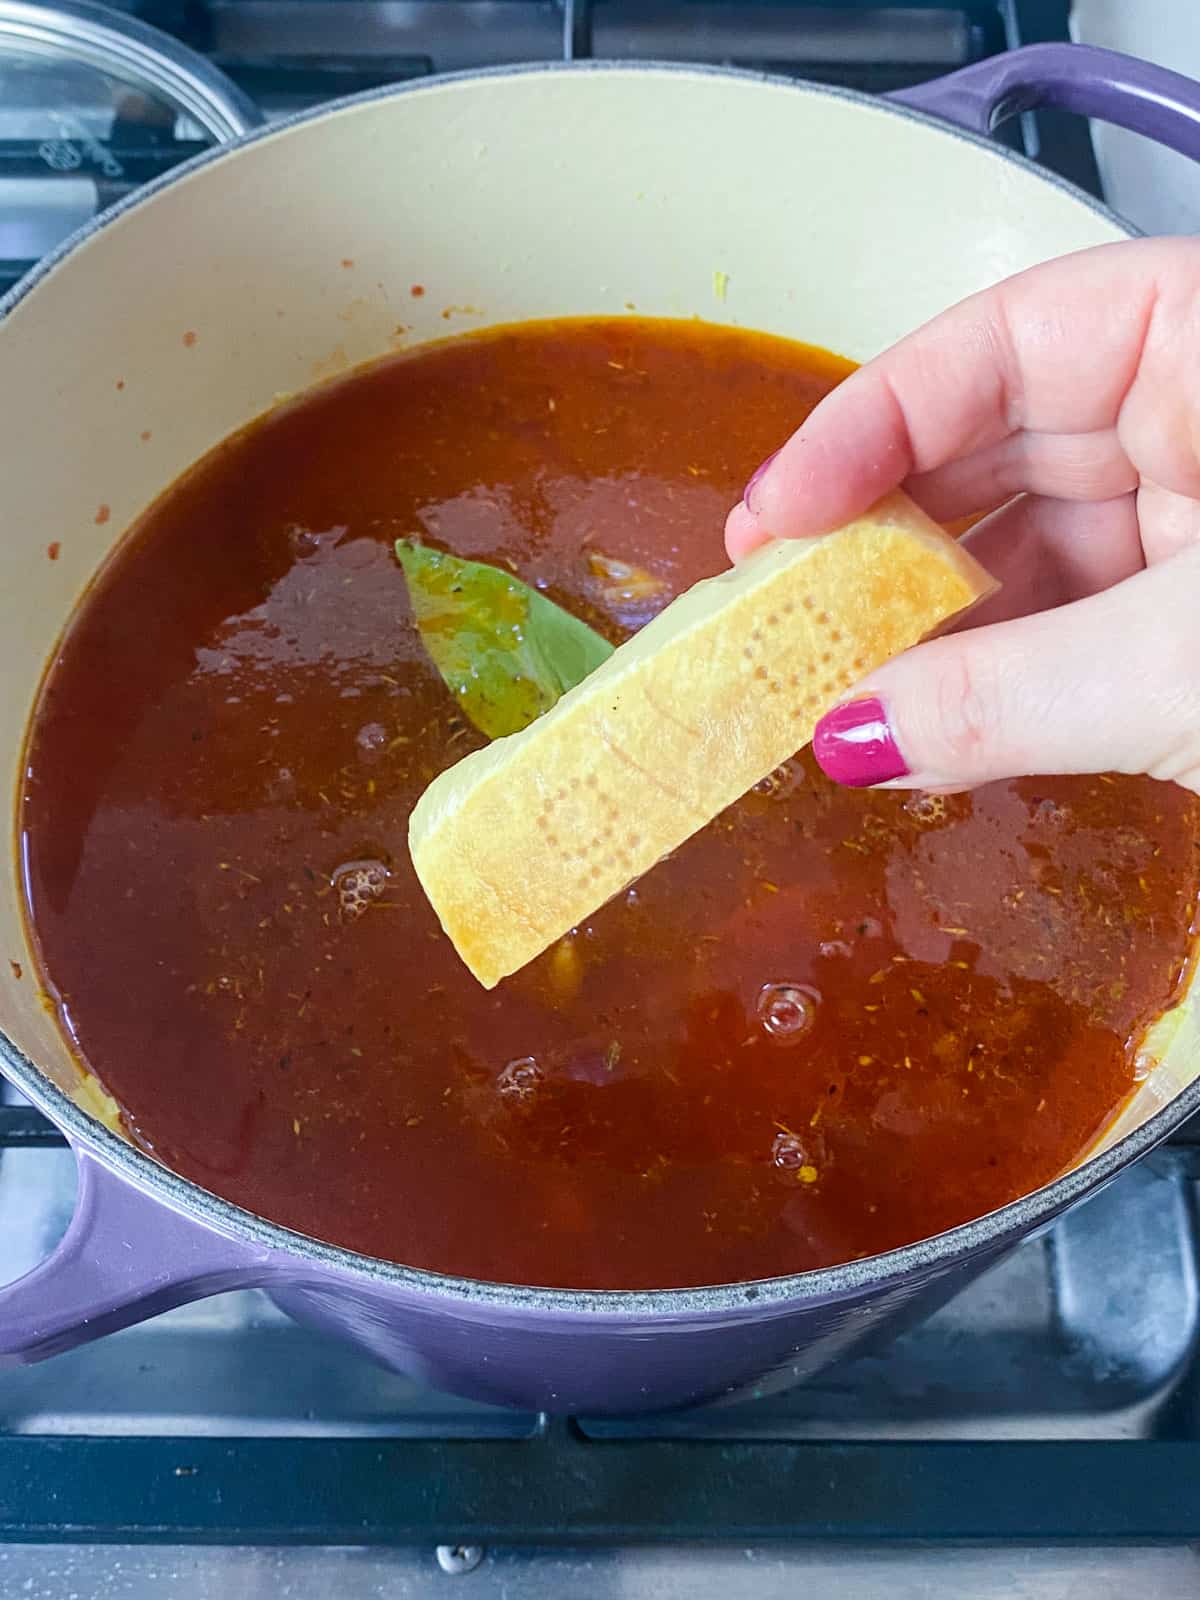 Add a good sized chunk of parmesan rind to the soup.